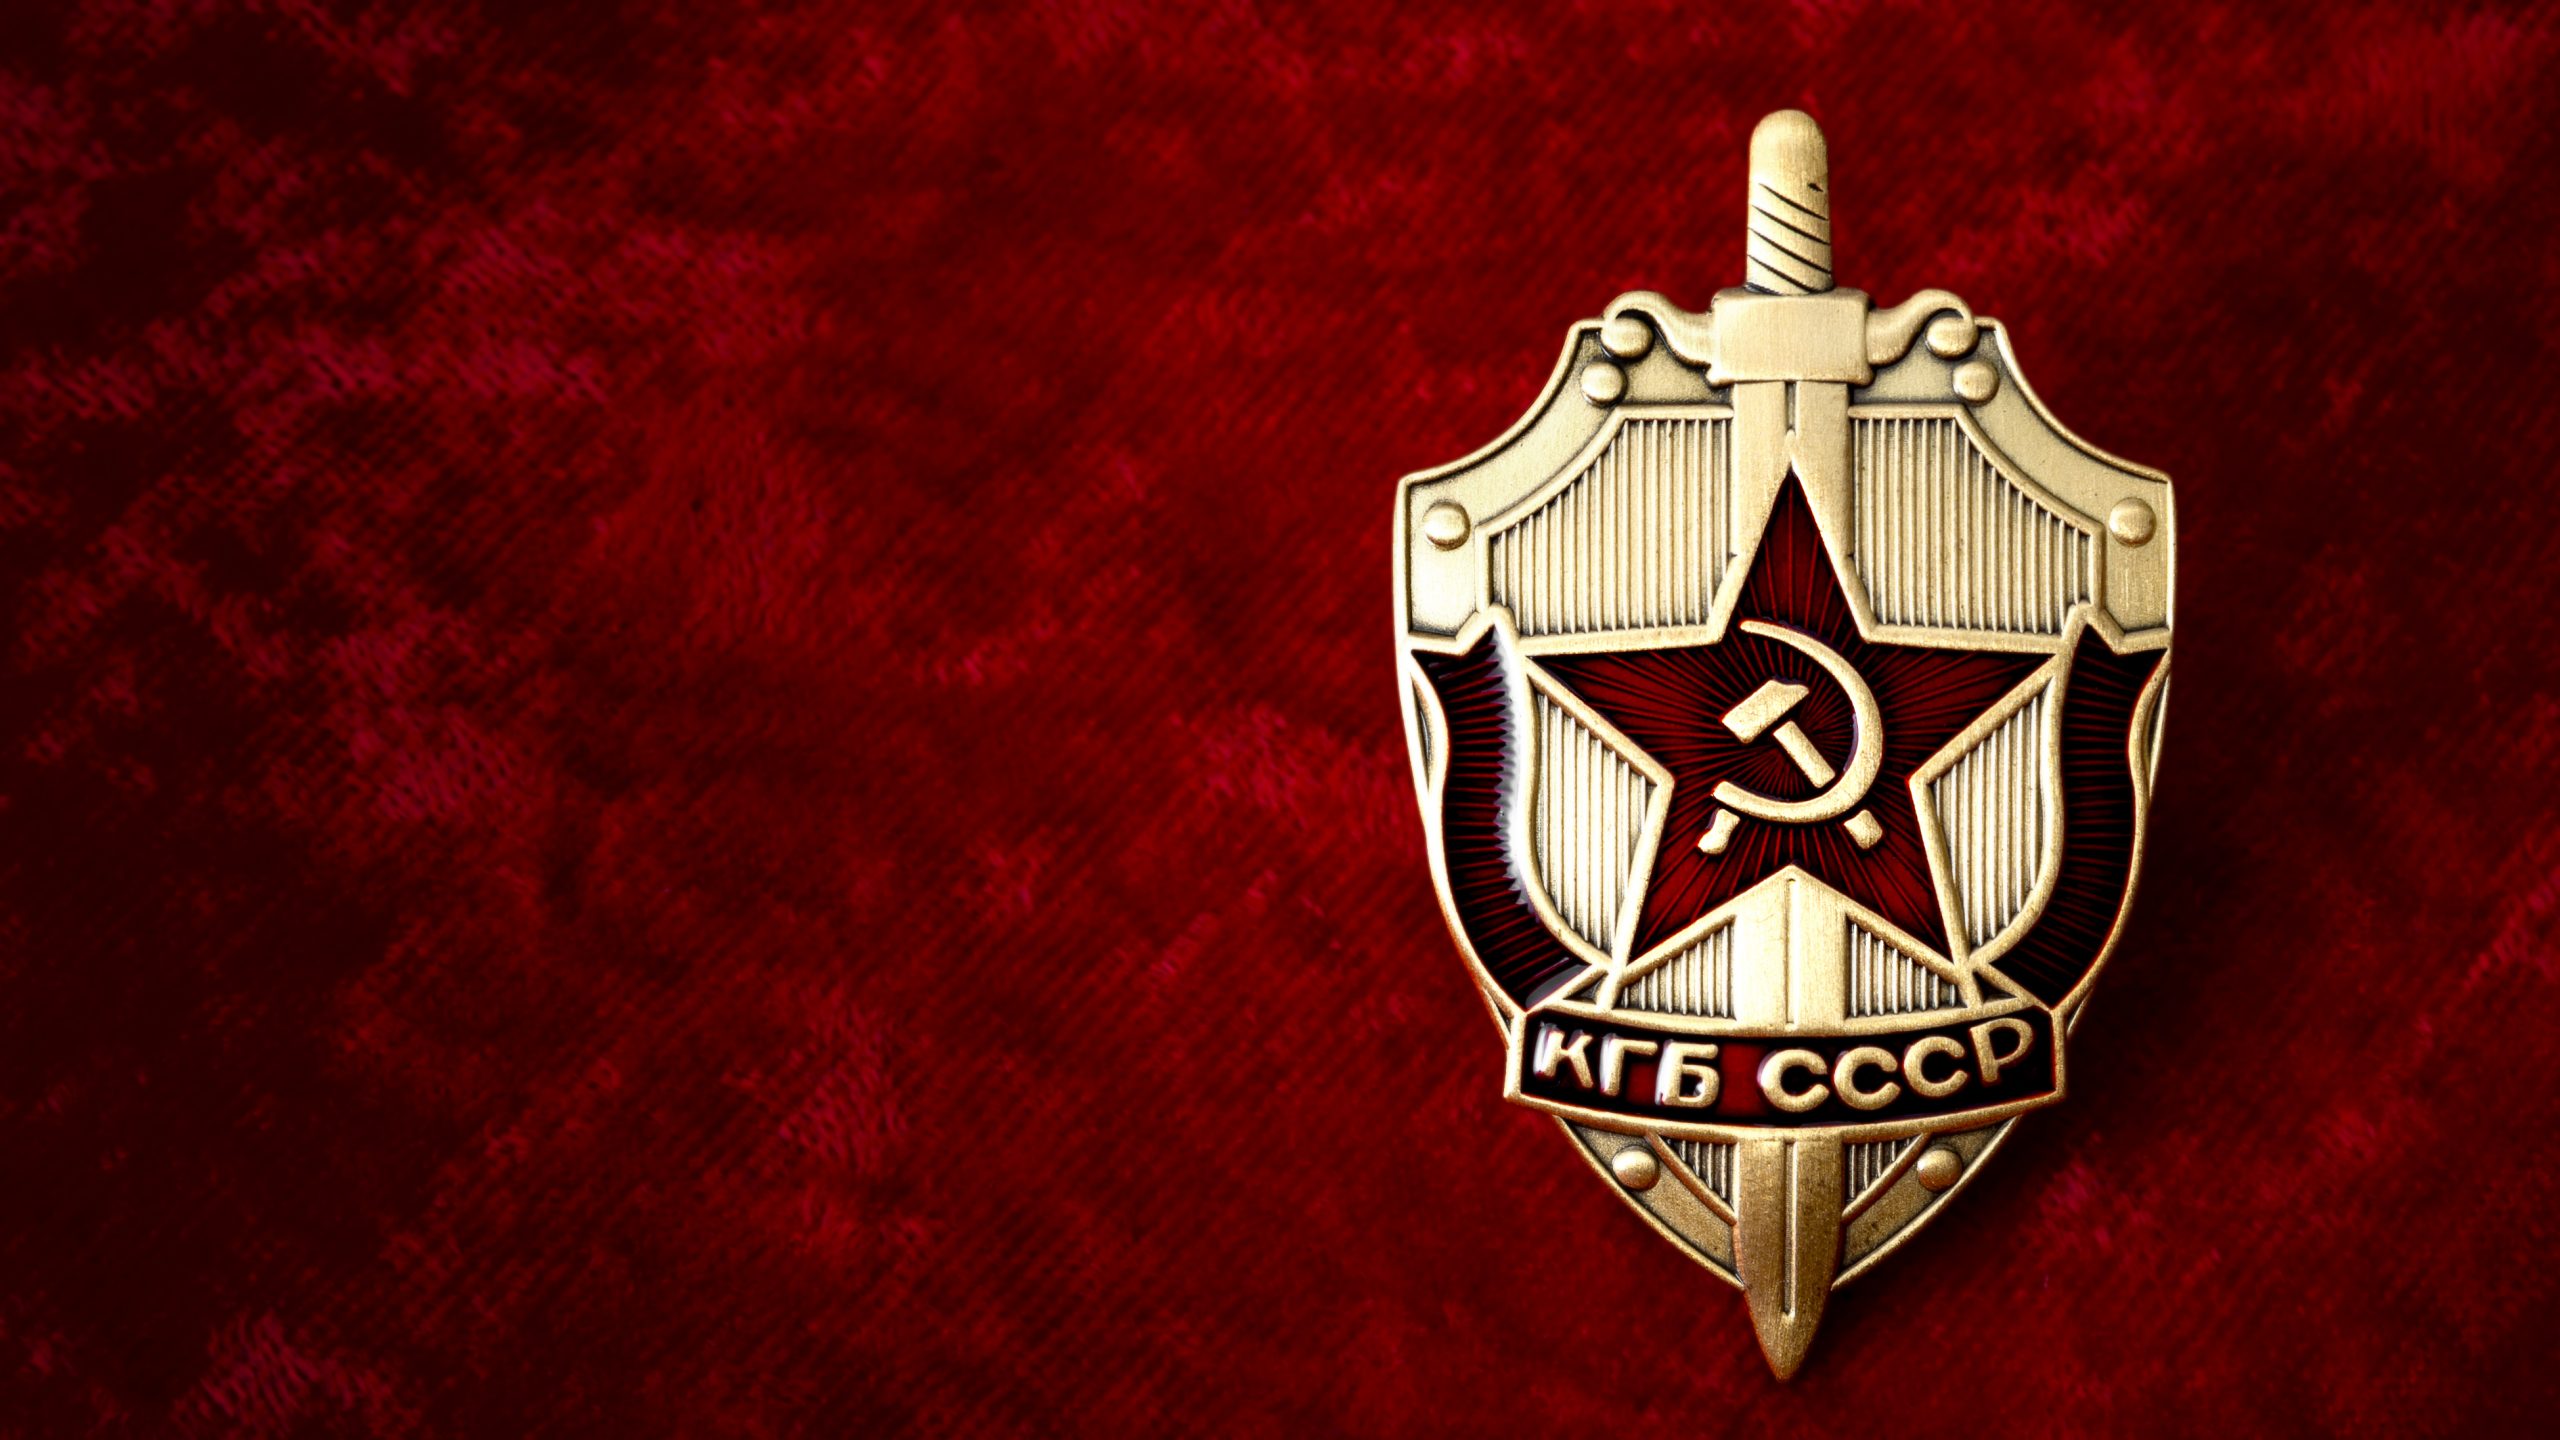 KGB badge on red background with copyspace